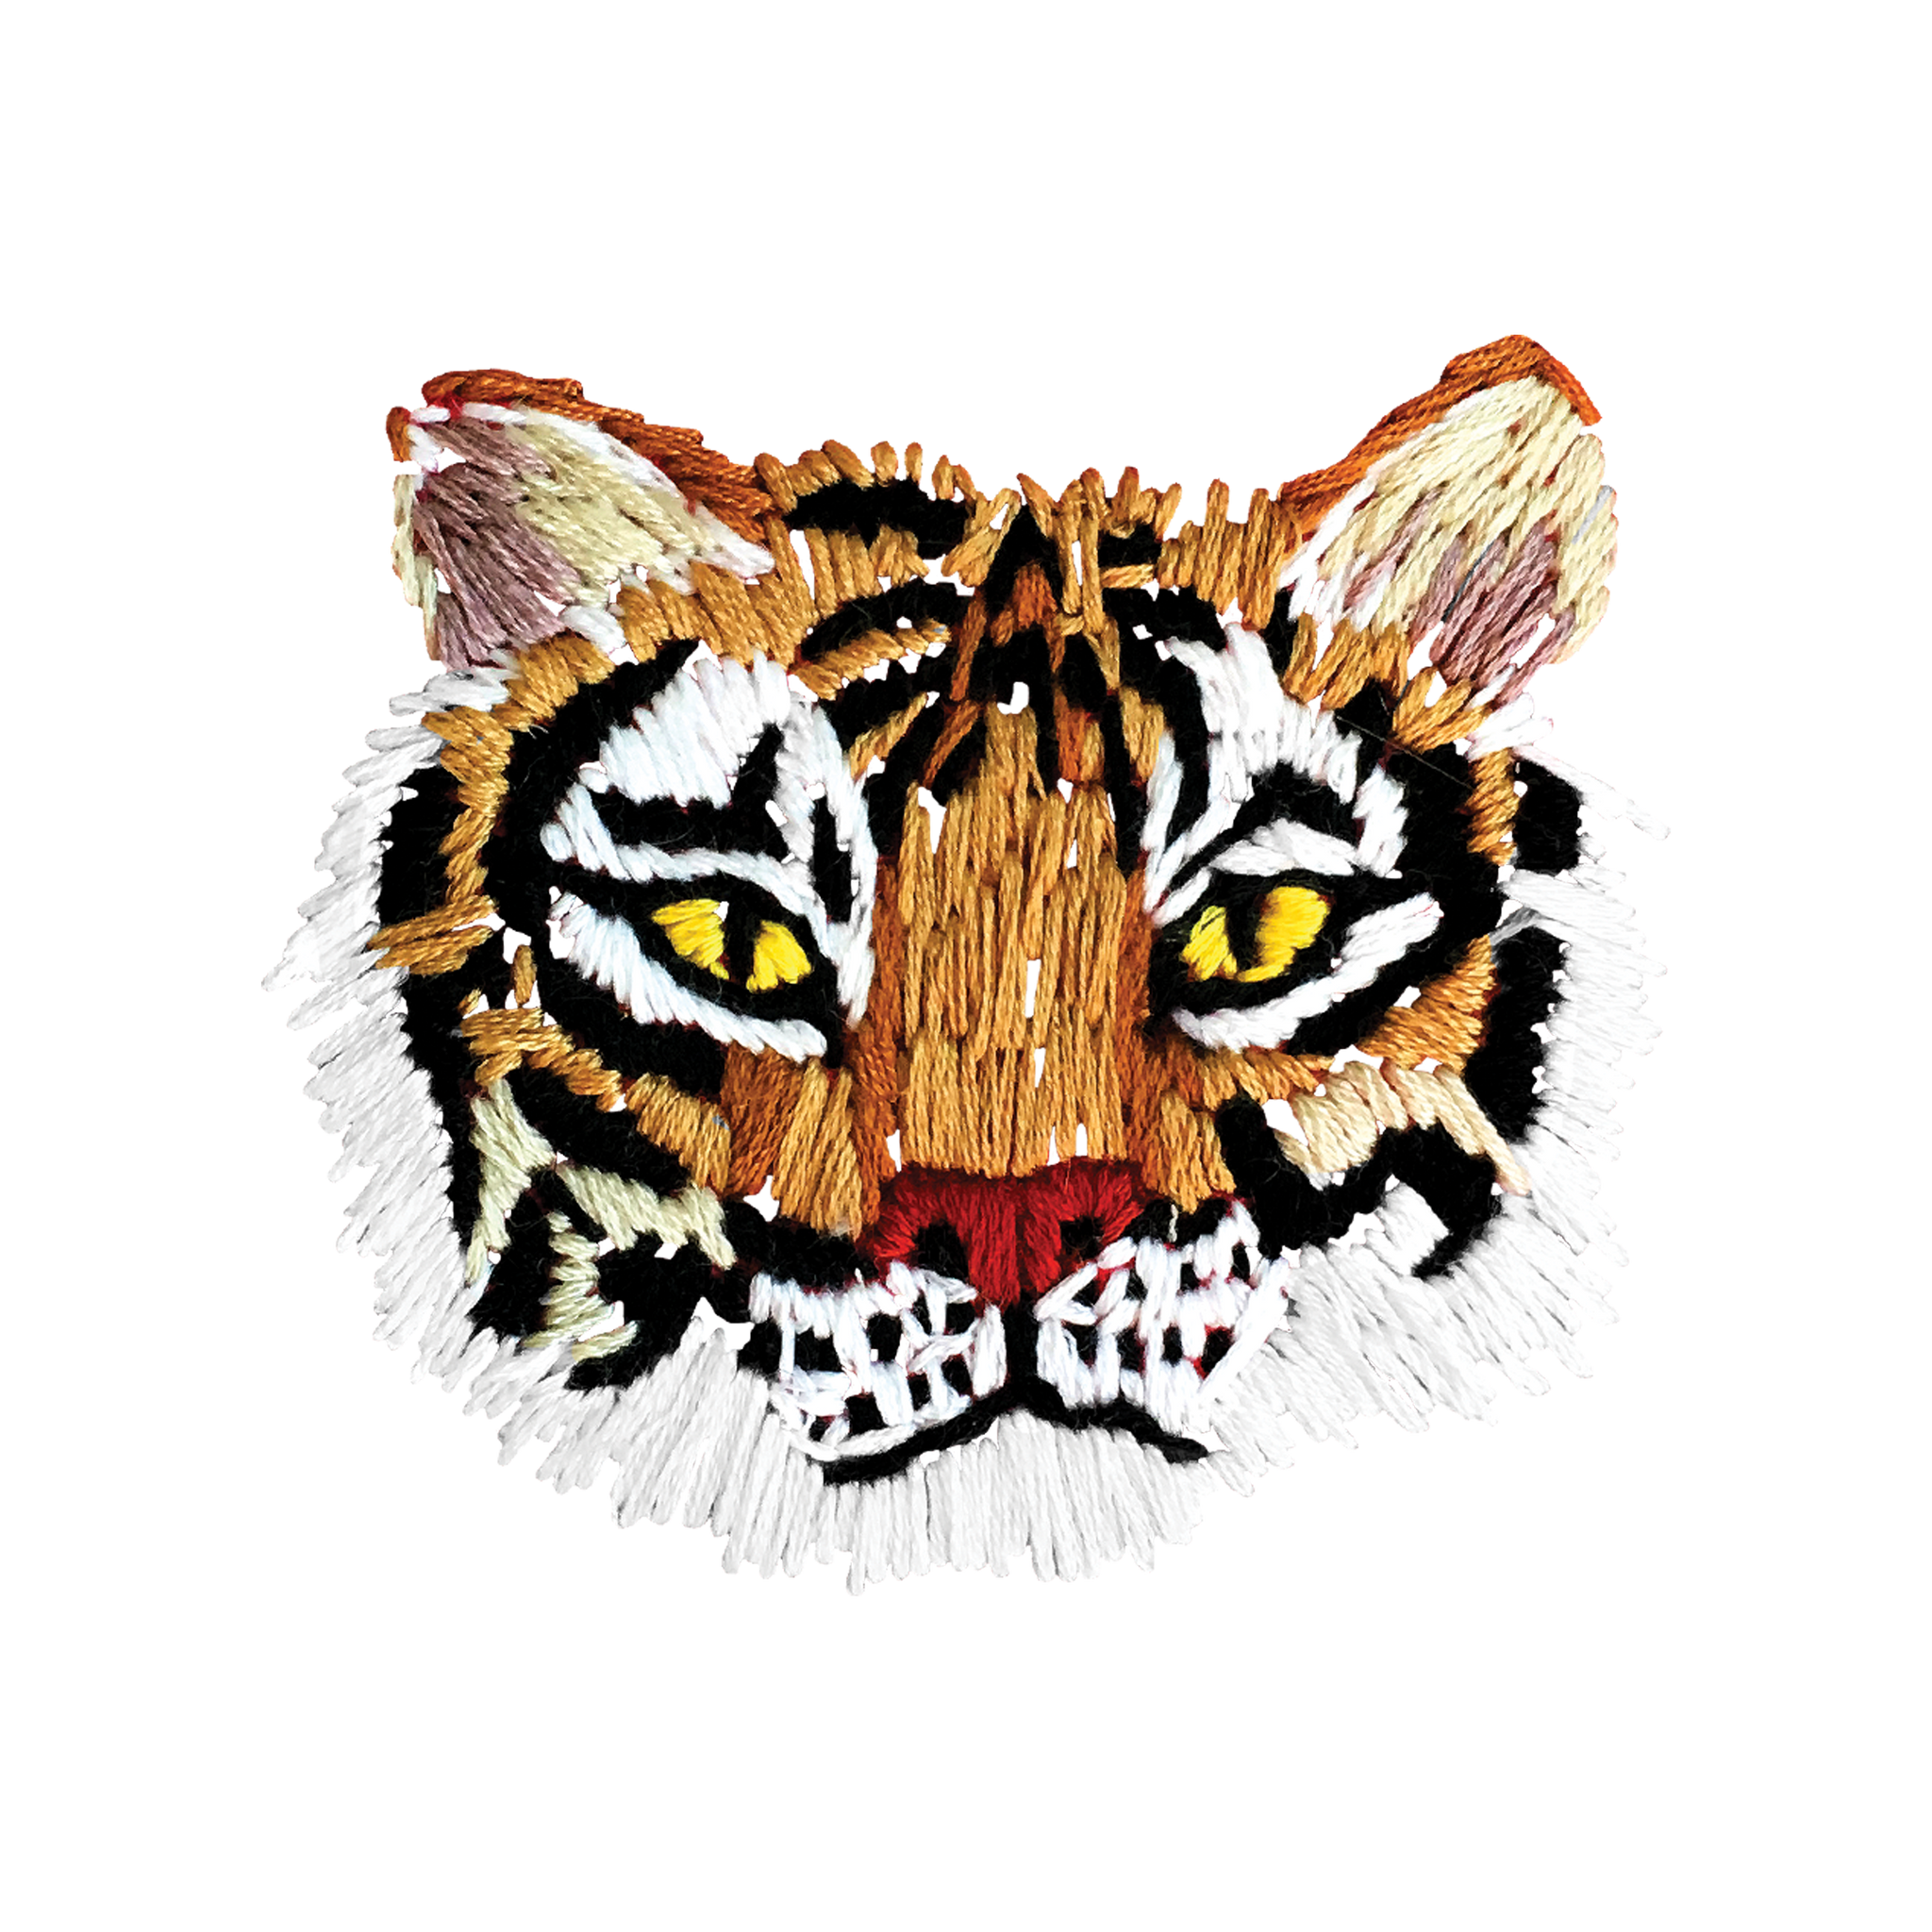 Amazon.com: Traditional Crawling Tiger Tattoo Design Sticker Outdoor Rated  Vinyl Sticker Decal for Windows, Bumpers, Laptops or Crafts 5